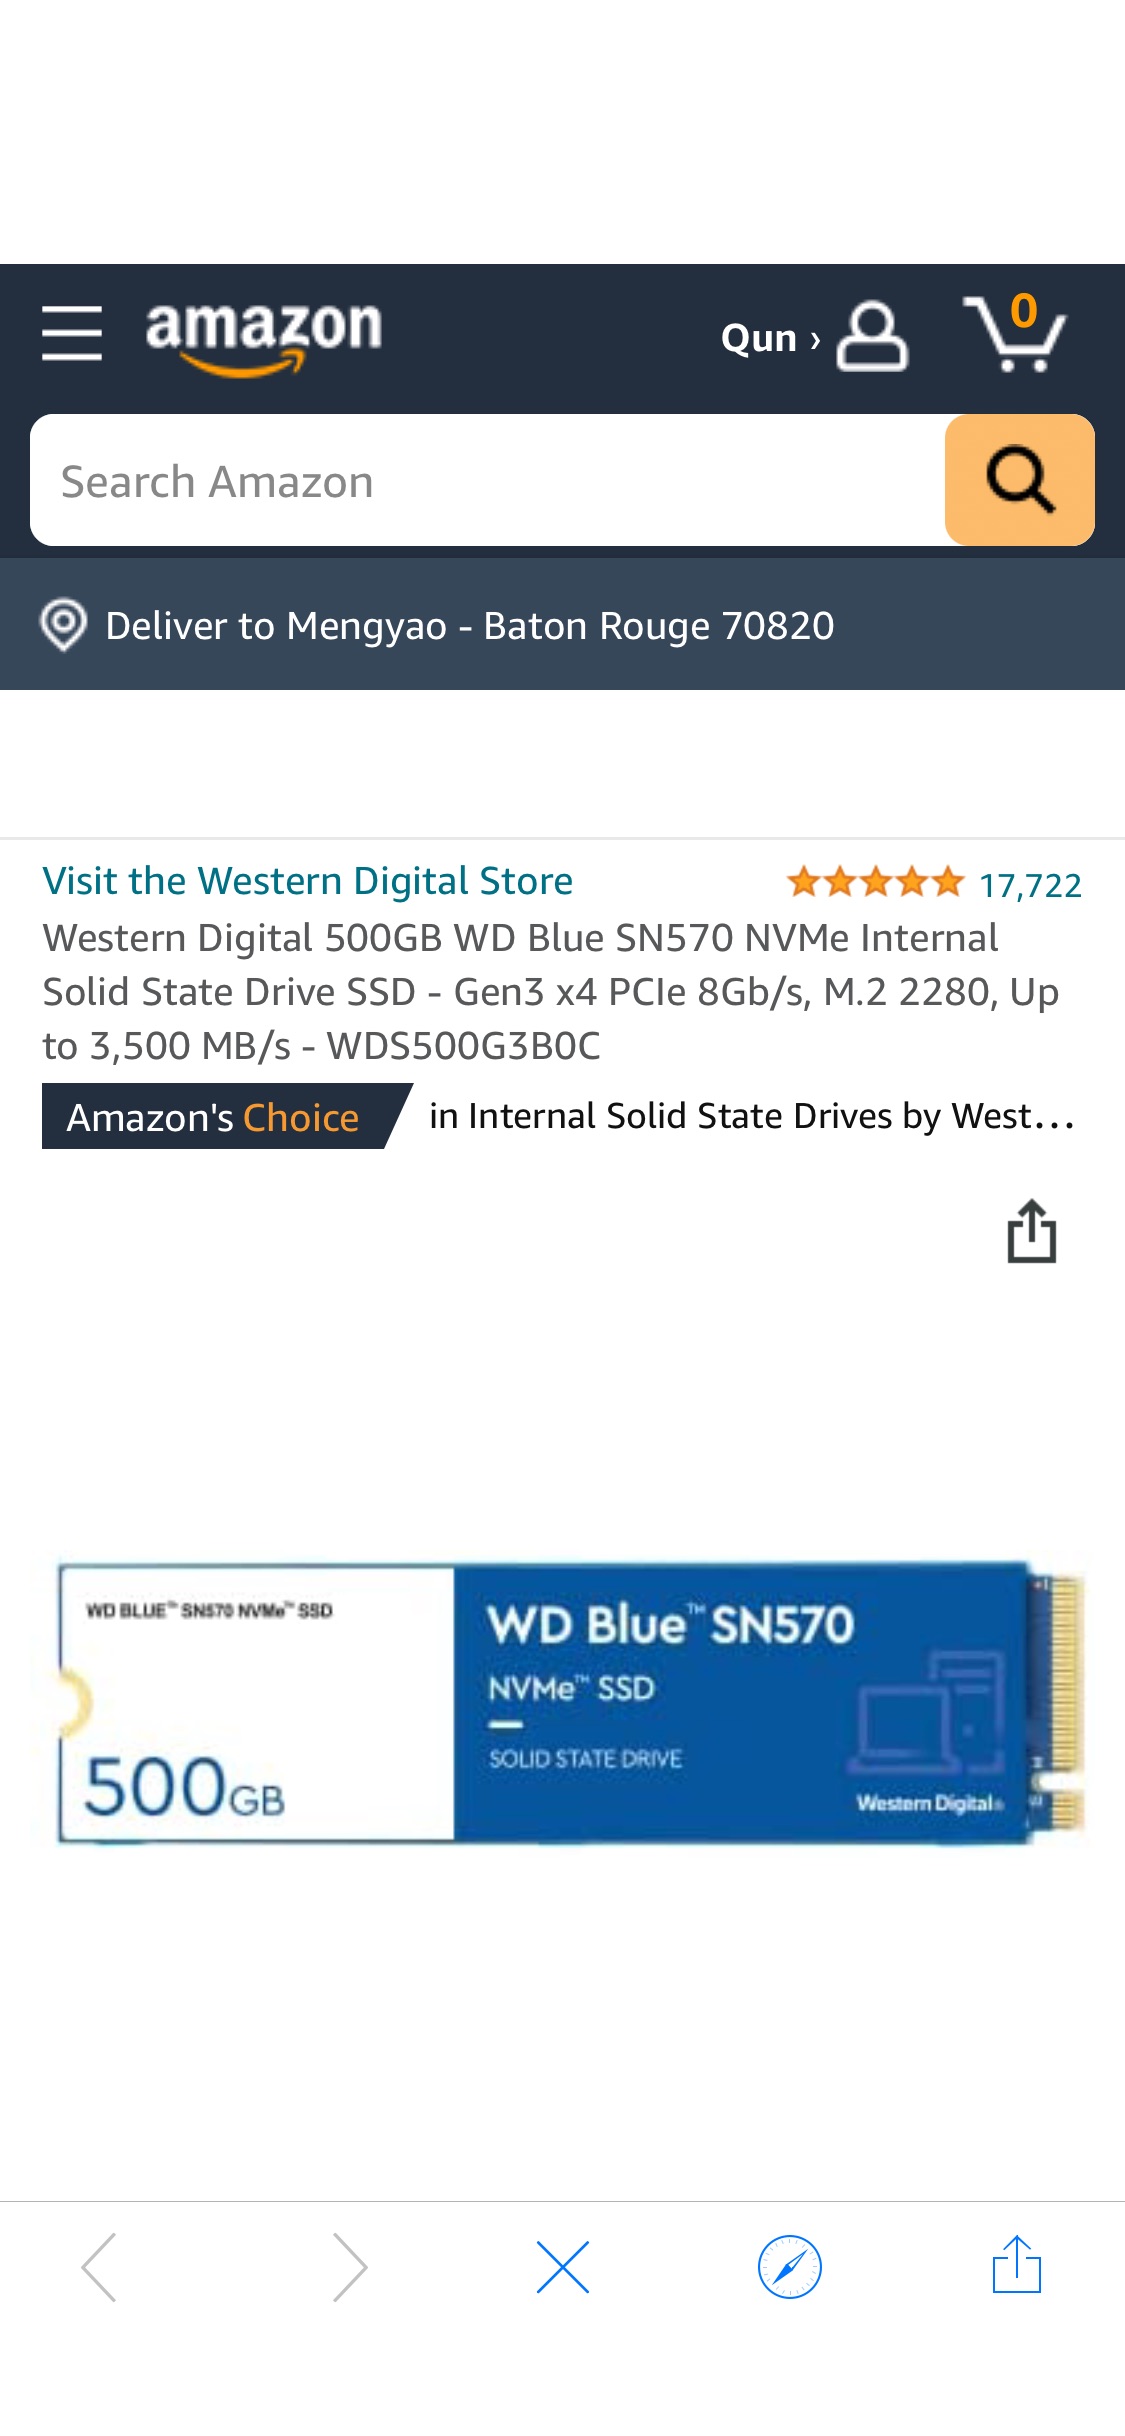 Amazon.com: Western Digital 500GB WD Blue SN570 NVMe Internal Solid State Drive SSD - Gen3 x4 PCIe 8Gb/s, M.2 2280, Up to 3,500 MB/s - WDS500G3B0C : Everything Else 硬盘